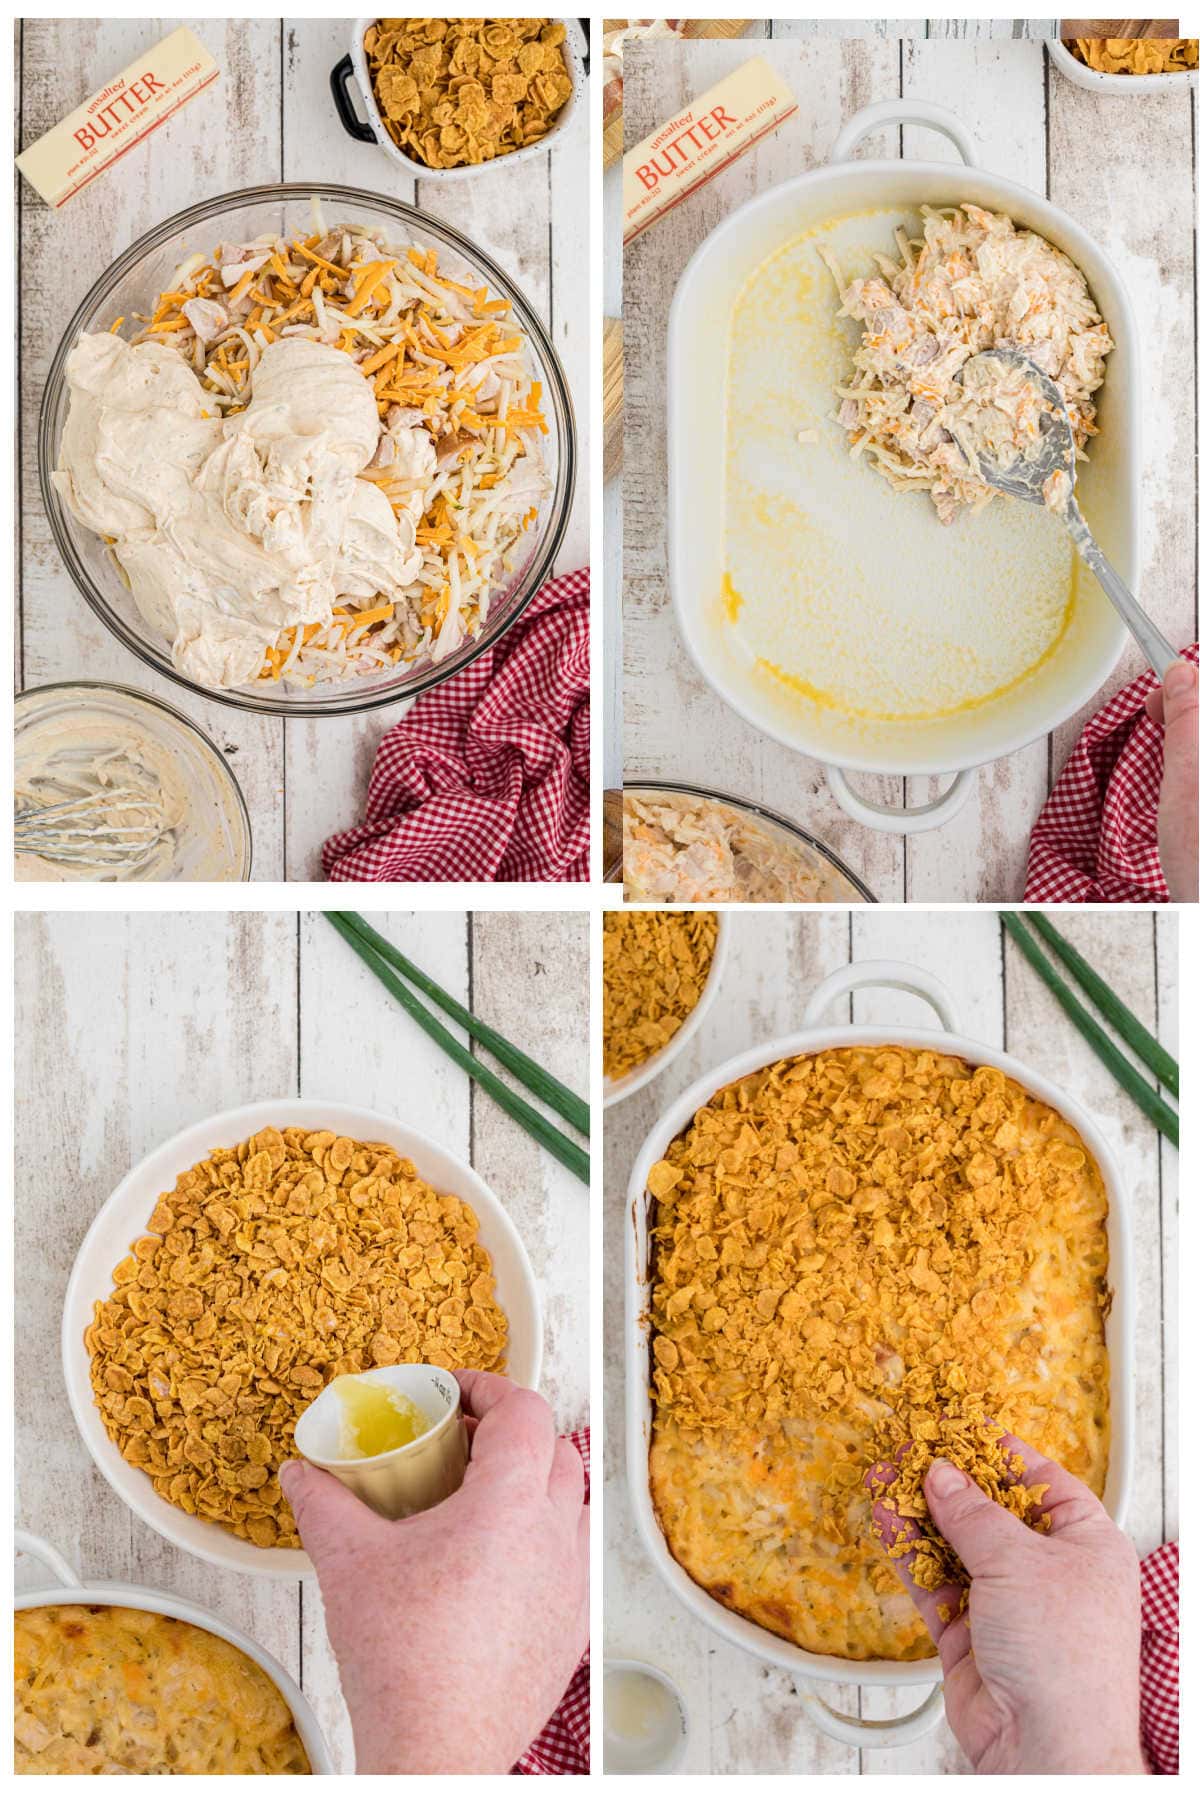 Step by step images showing how to make hashbrown chicken casserole.